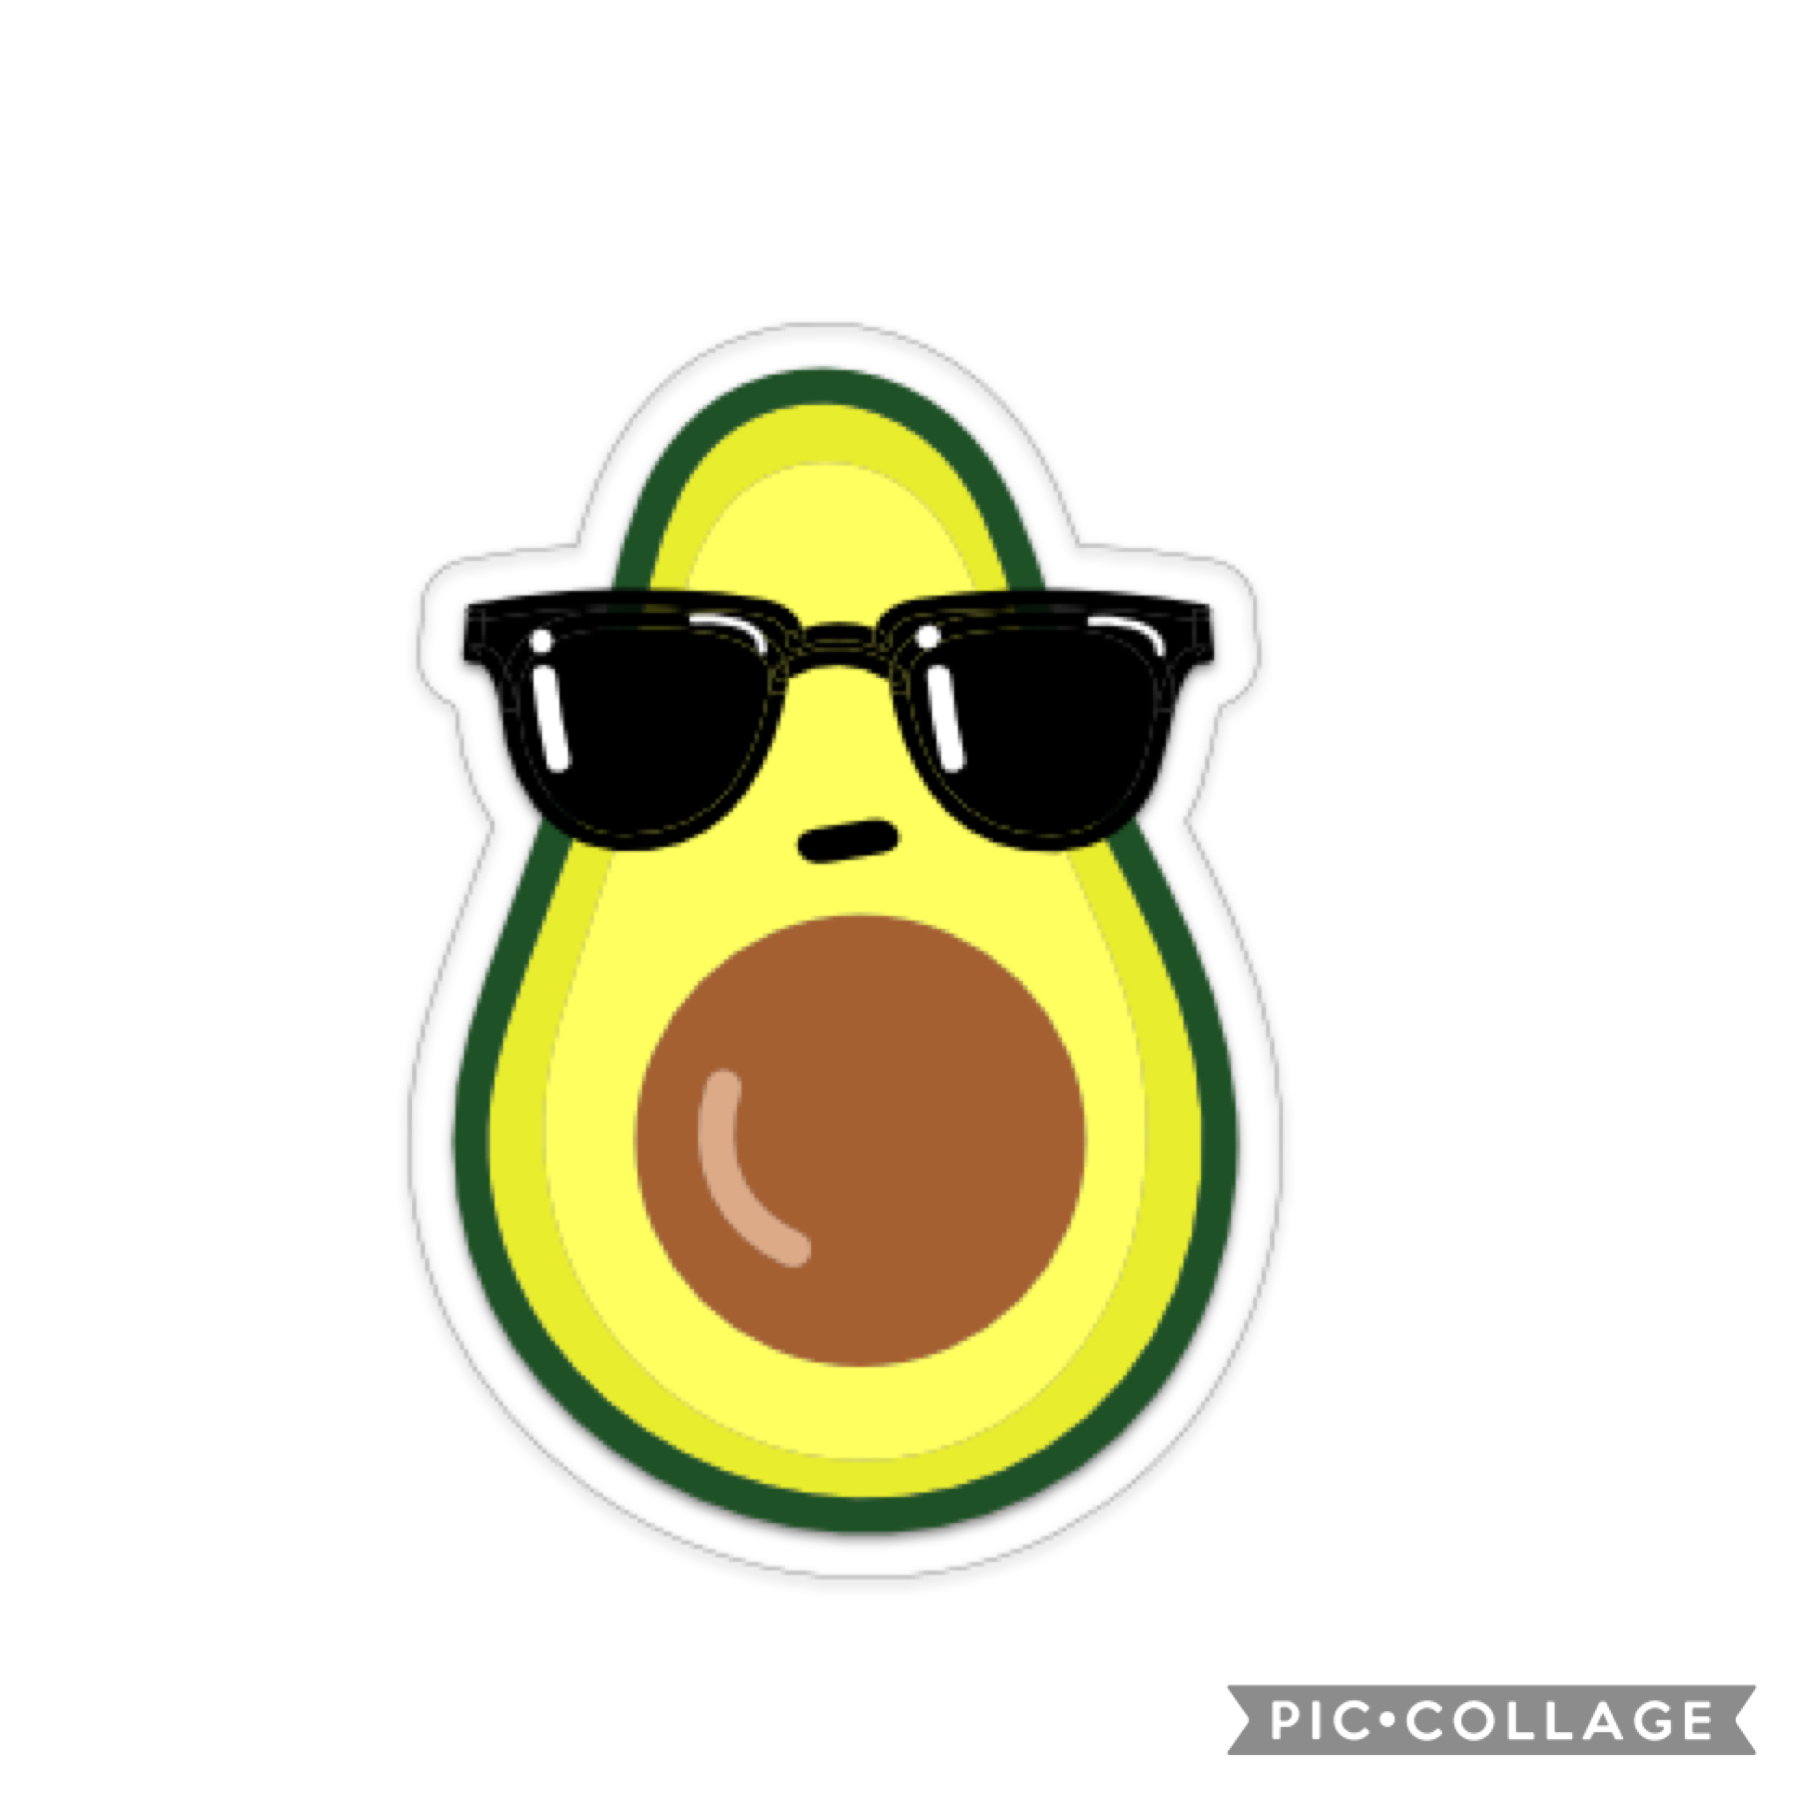 If you like and follow, you will be one cool avacado! (Post by hannahdaqueen) 